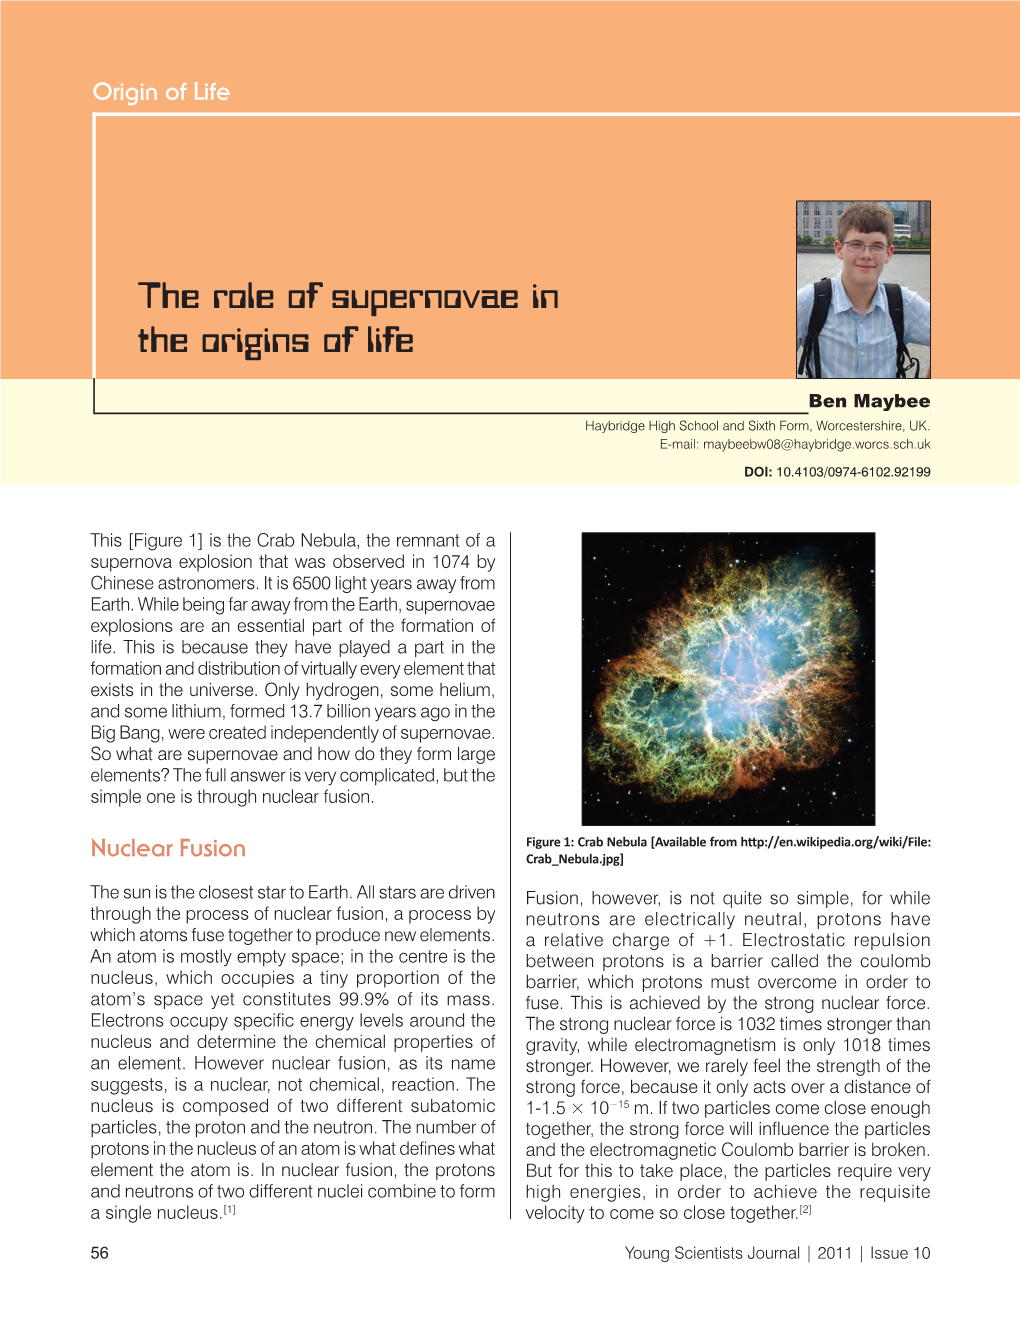 The Role of Supernovae in the Origins of Life